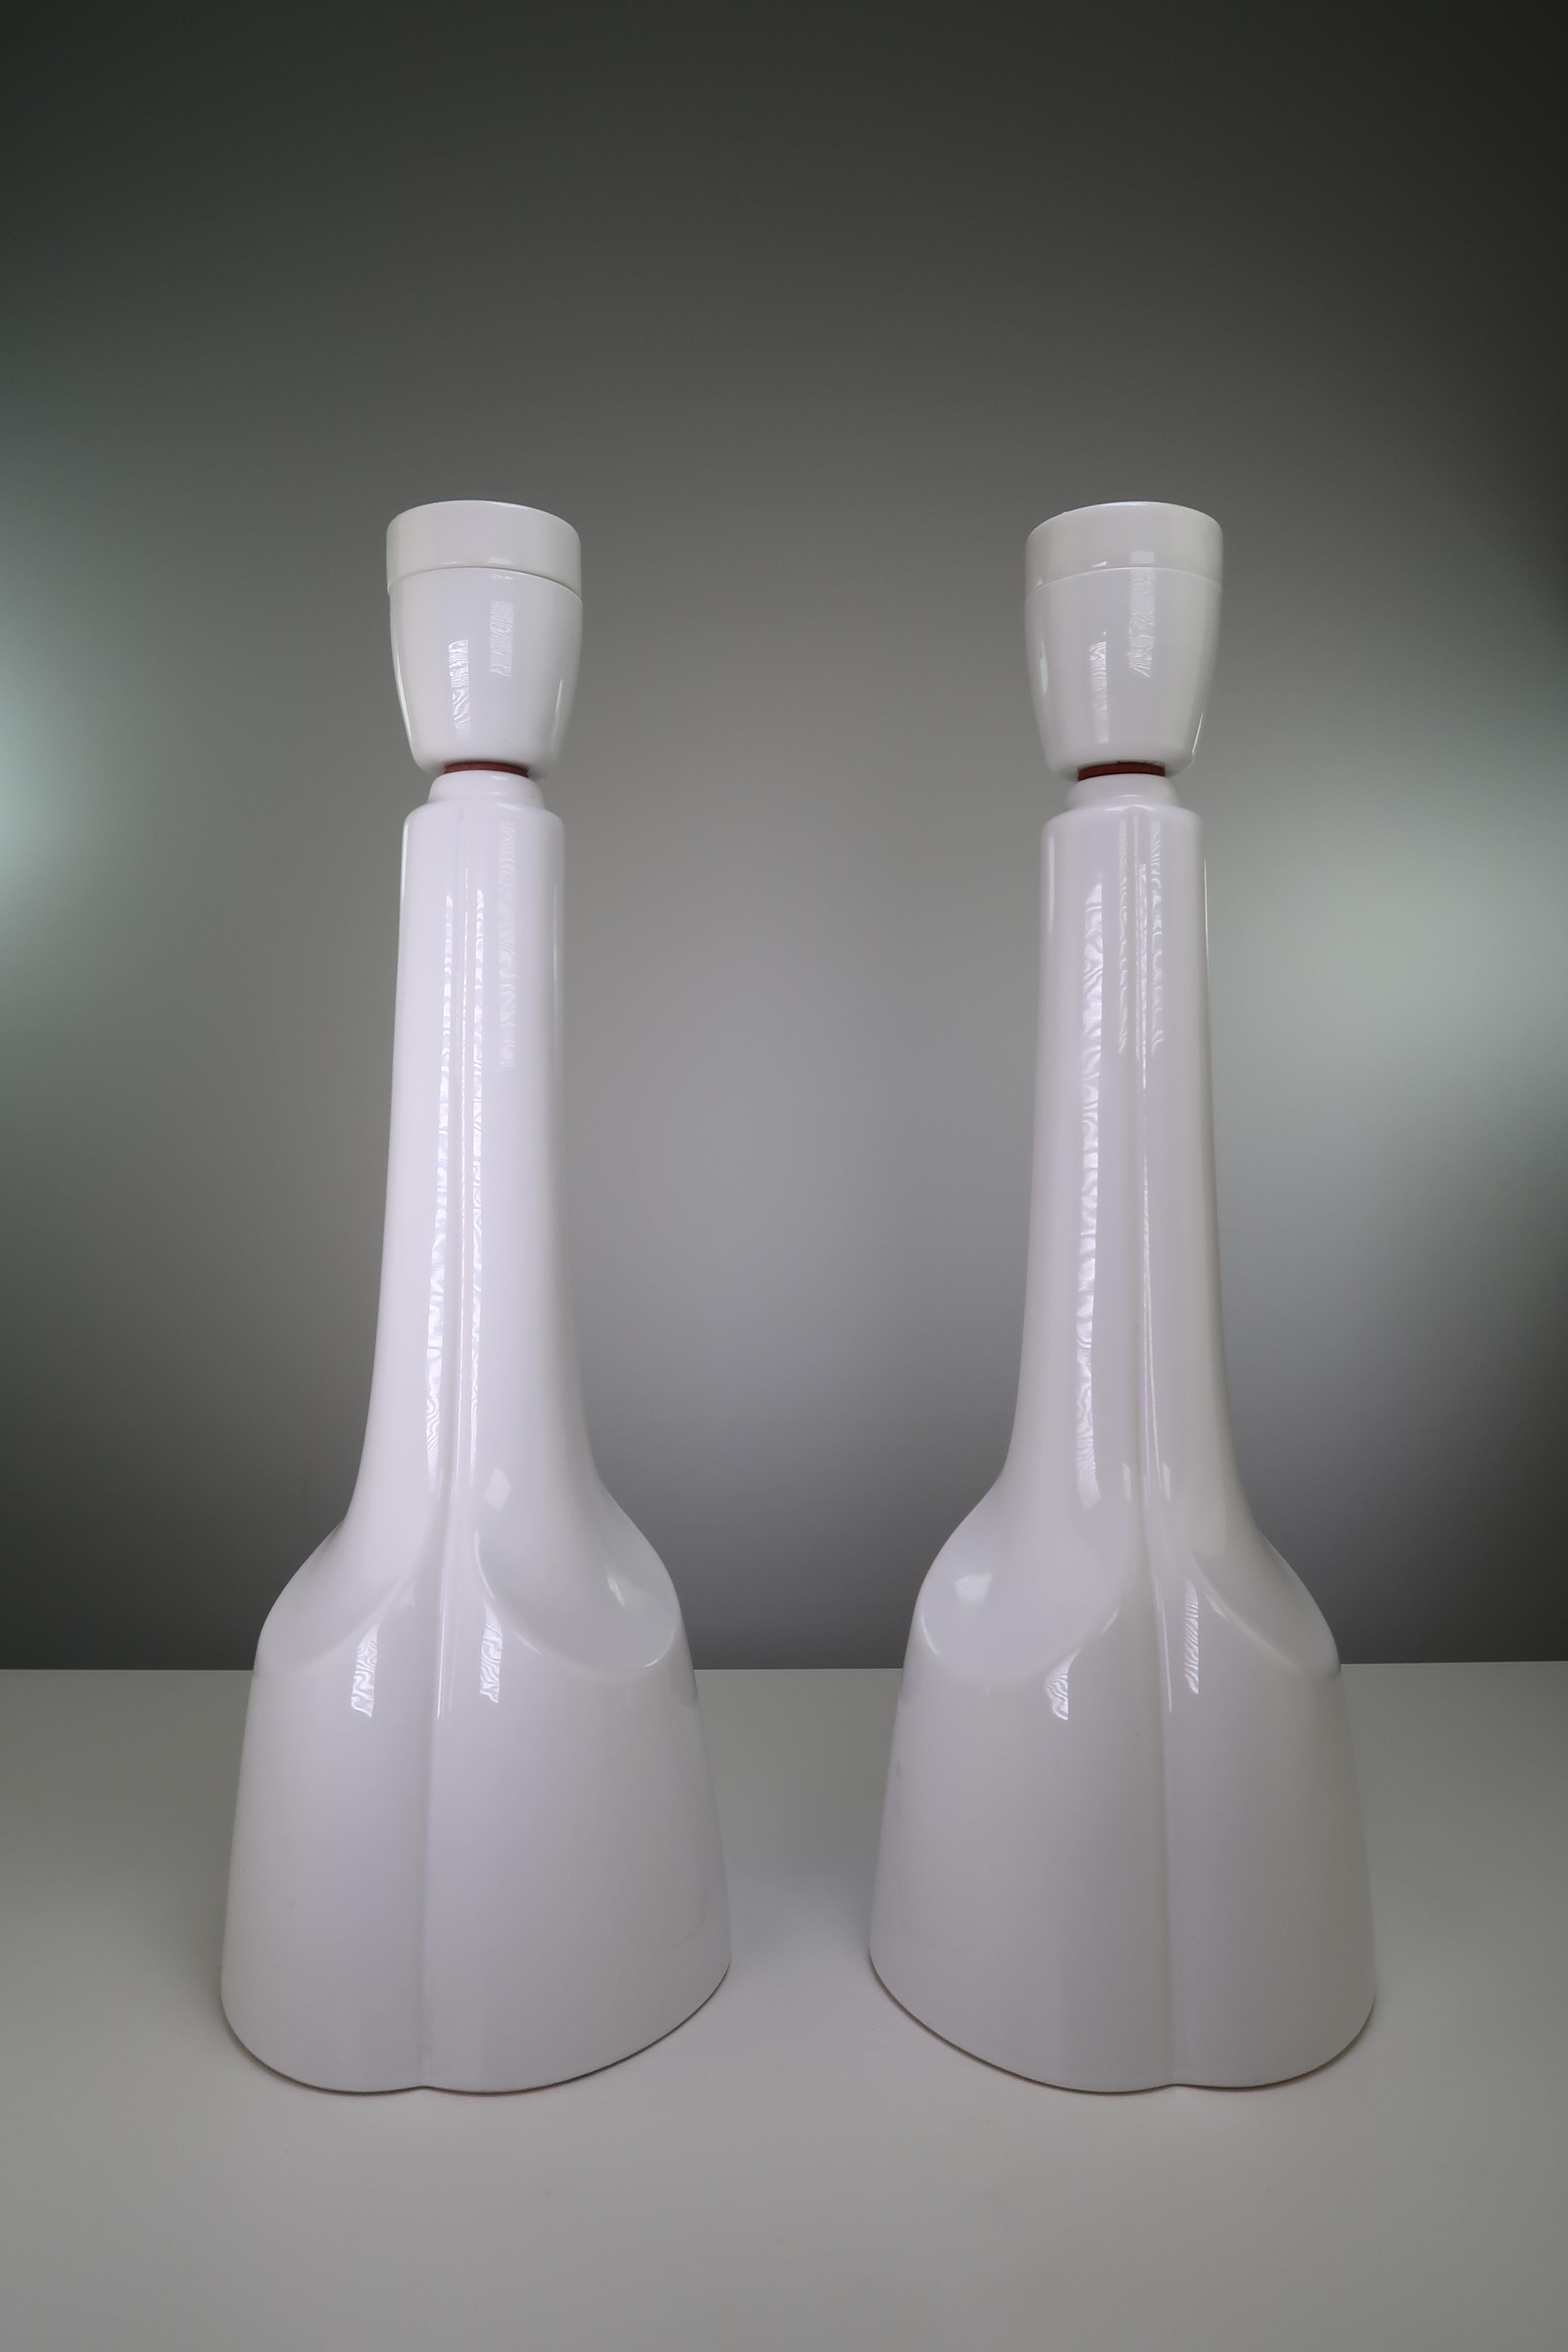 Stunning and elegant pair of tall and slender bone white Scandinavian Mid-Century Modern porcelain table lamps by Danish Søholm Stentøj. Manufactured on the small Danish island of Bornholm in the 1950s. Stamped on the base. Model 904. Rewired with